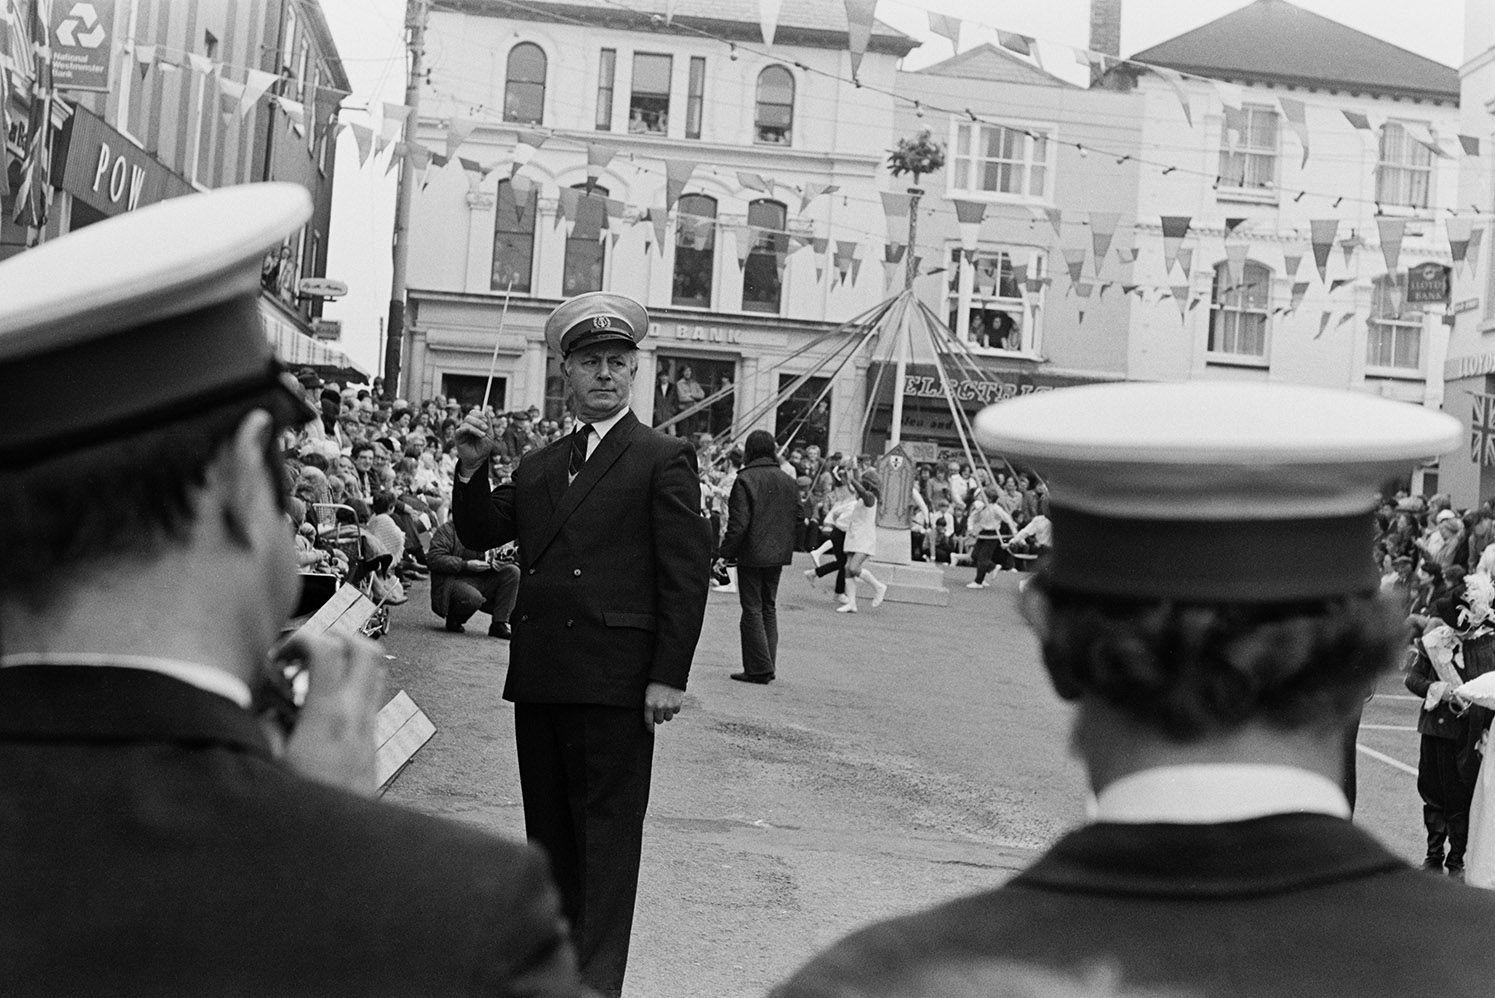 A man conducting a children's brass band at Torrington May Fair. May pole dancers are in the square in the background. The street is decorated with bunting.